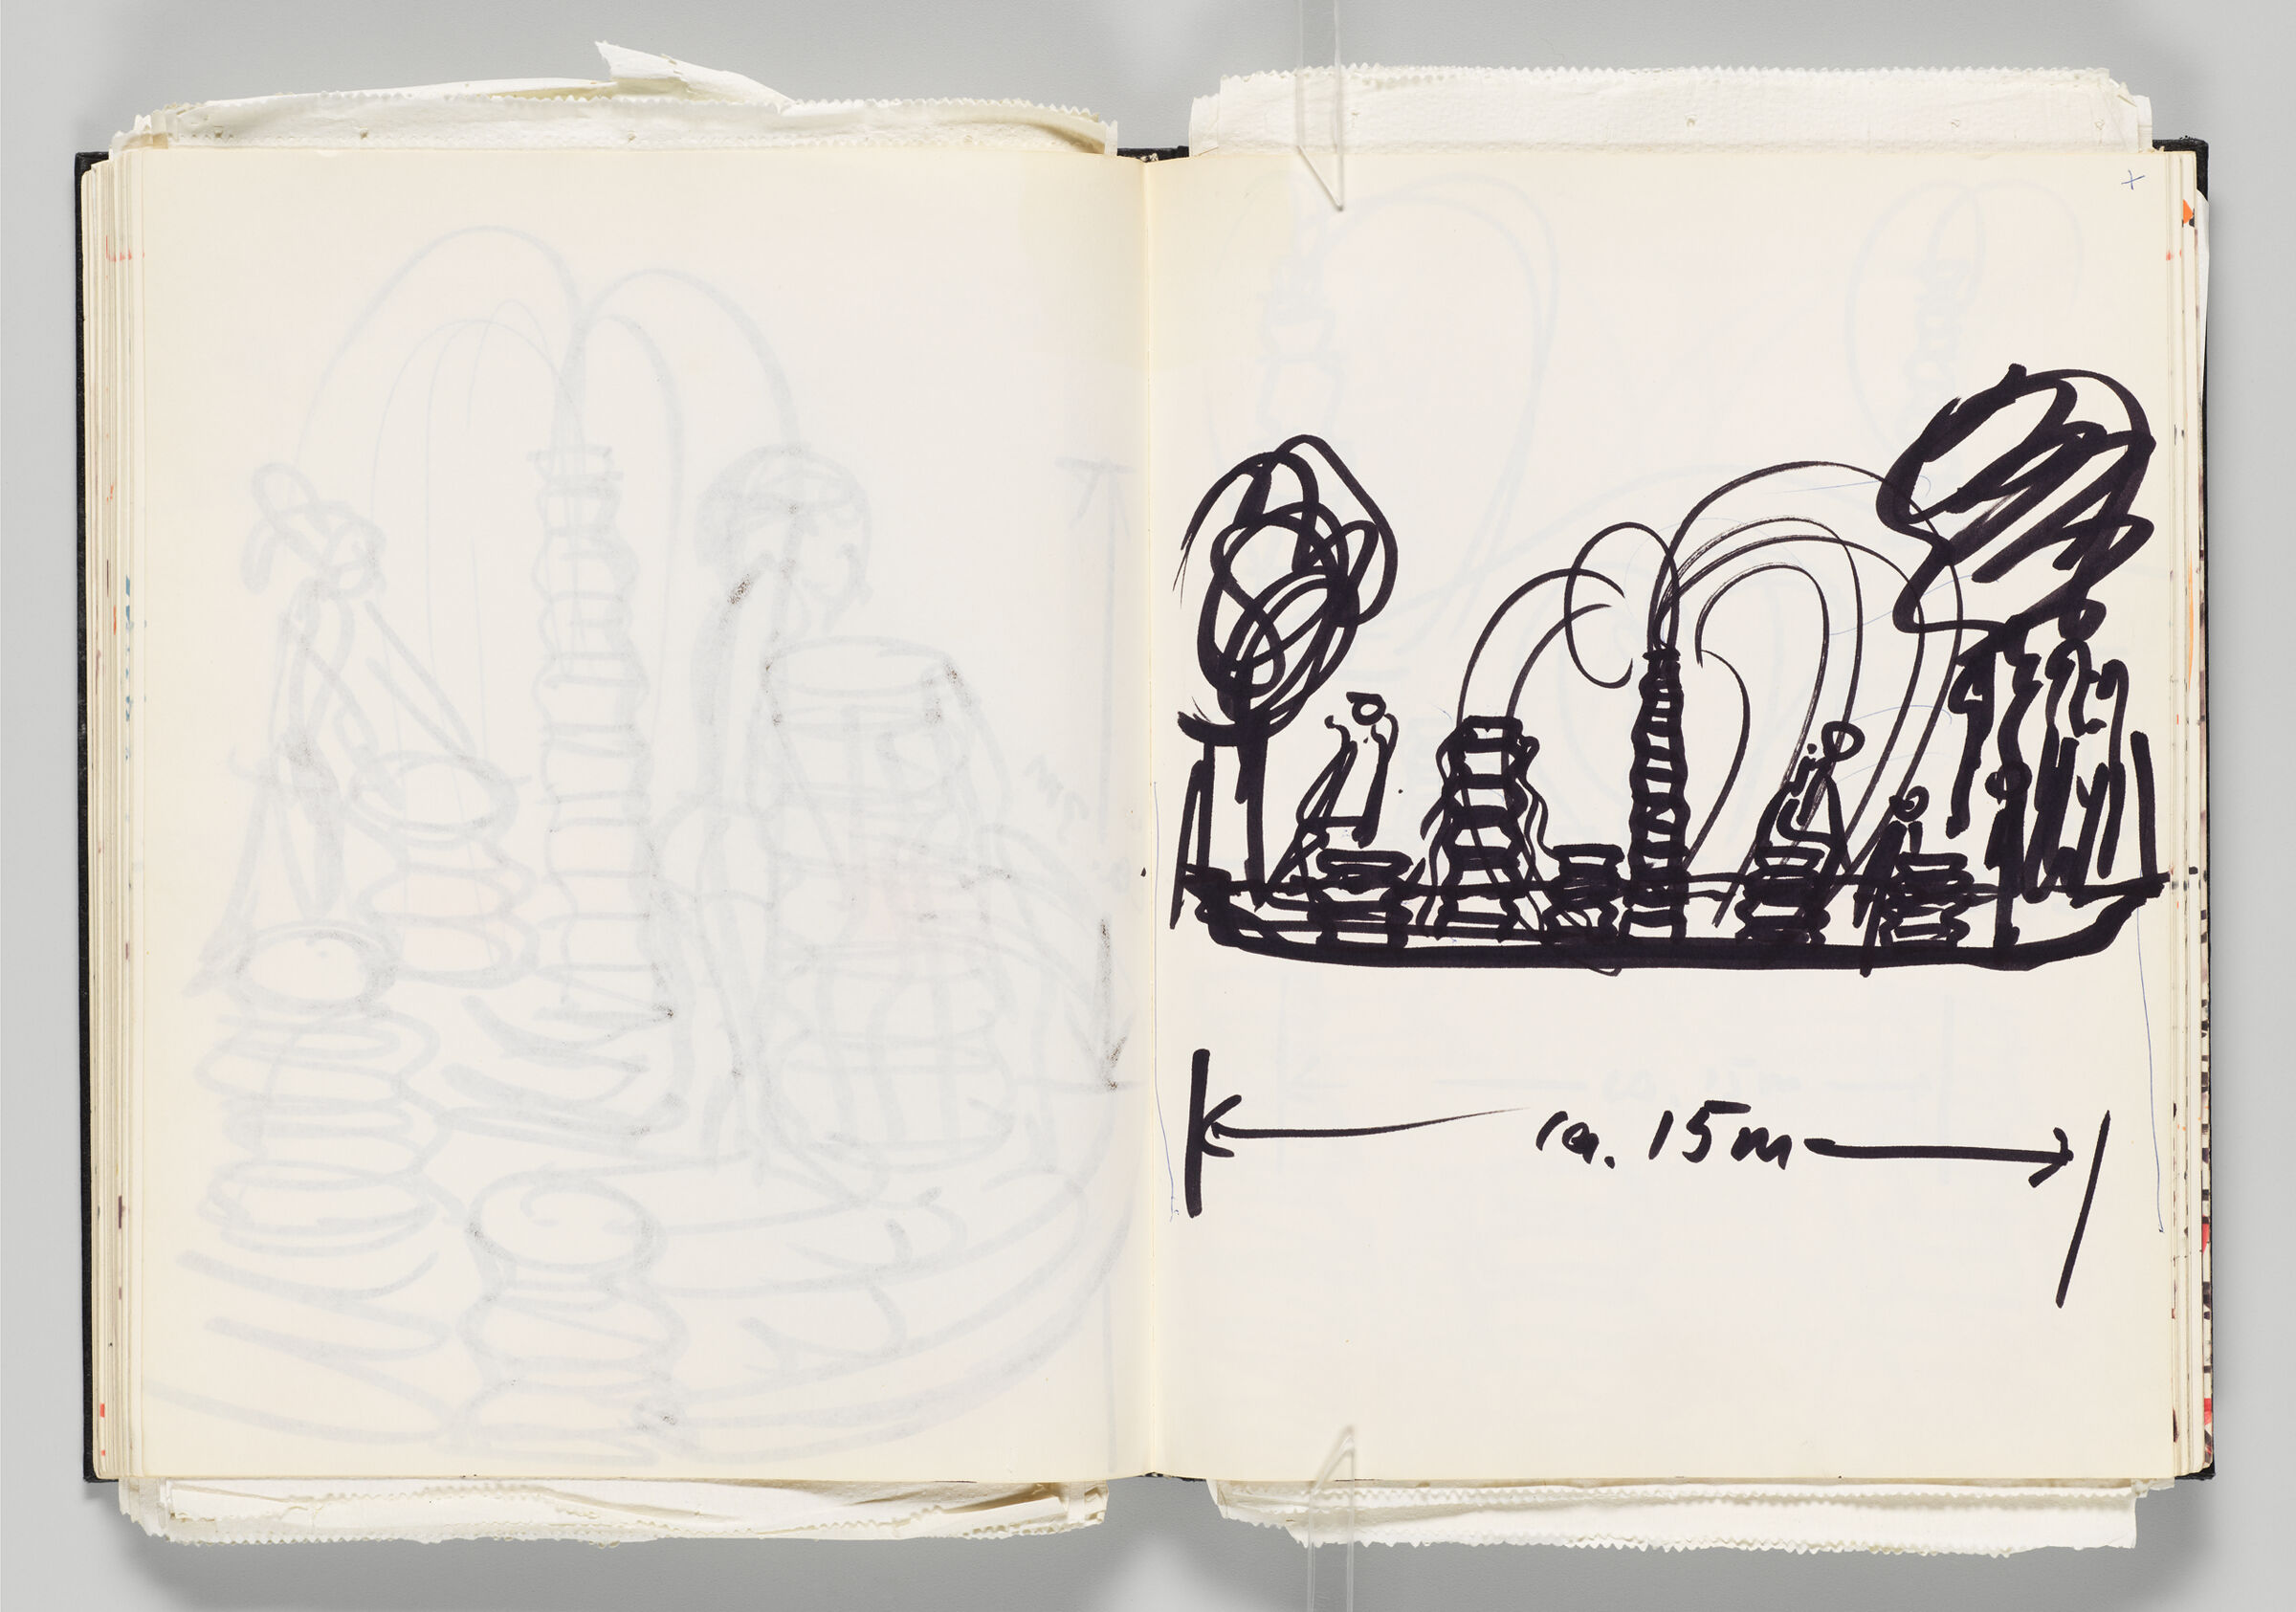 Untitled (Bleed-Through Of Previous Page, Left Page); Untitled (Fountain Design With Scale, Right Page)